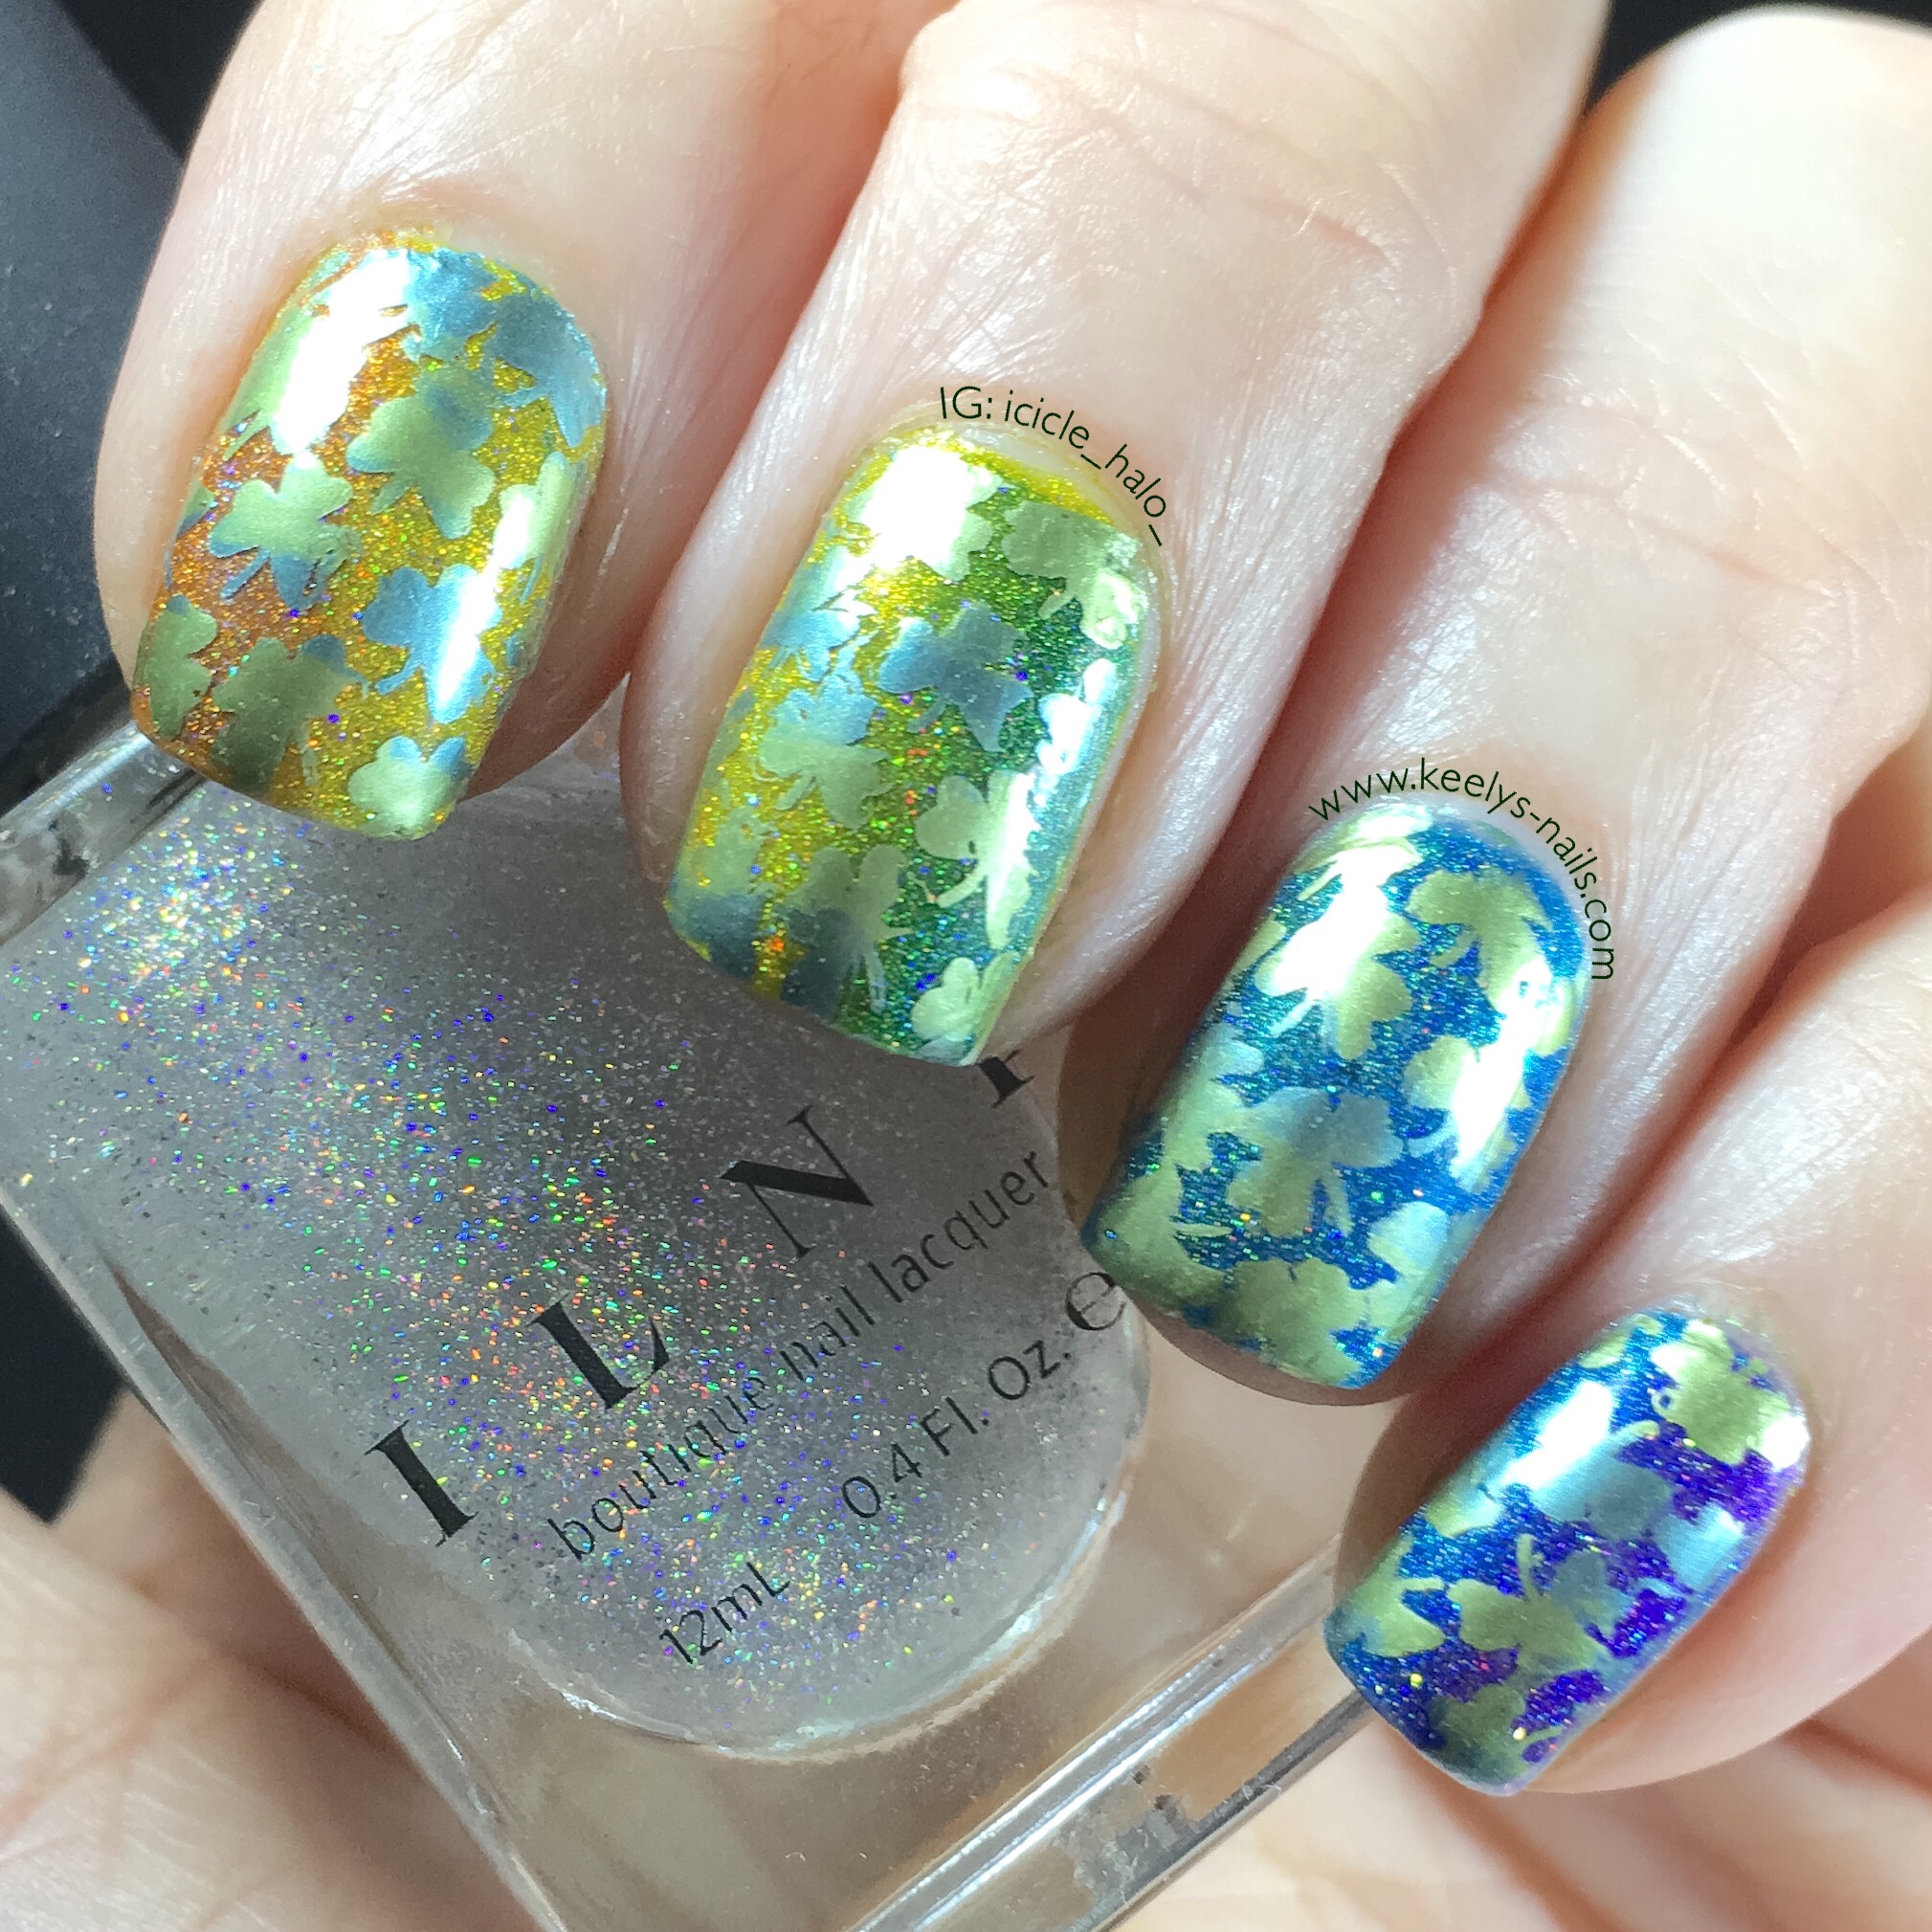 St Patrick's Day rainbow and stamping - left hand